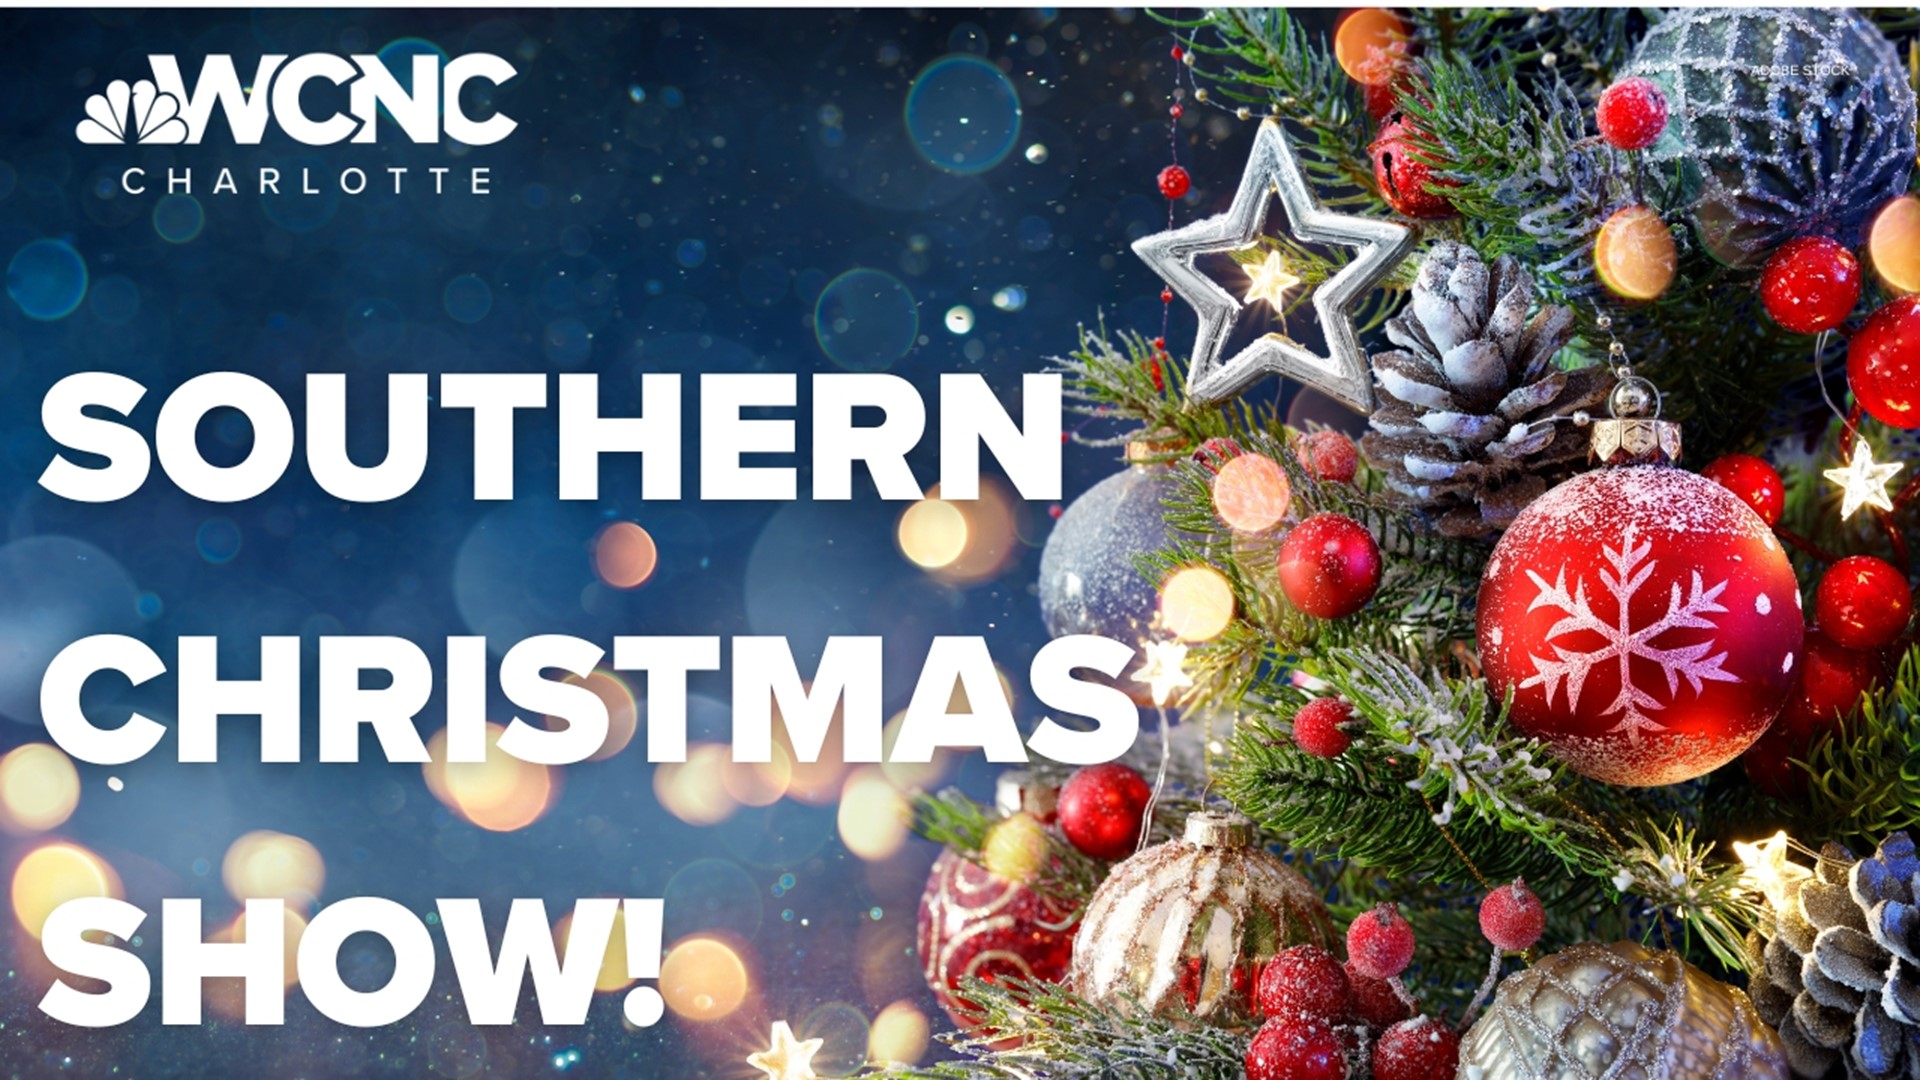 The Southern Christmas Show kicks off today at the Park Expo and Conference Center.